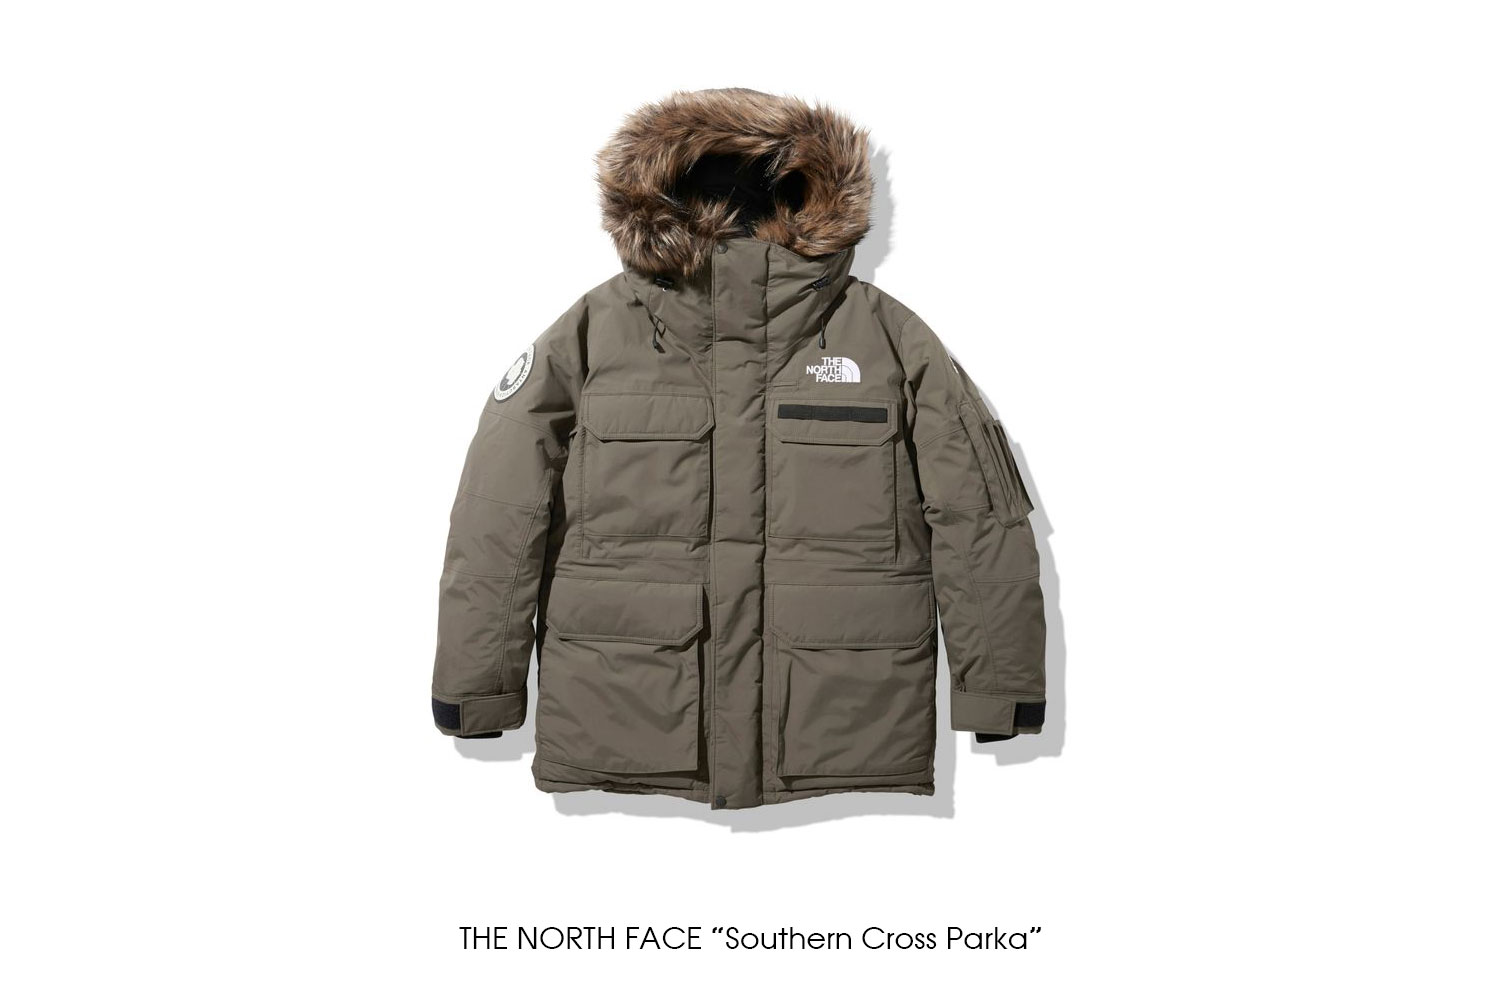 THE NORTH FACE "Southern Cross Parka"